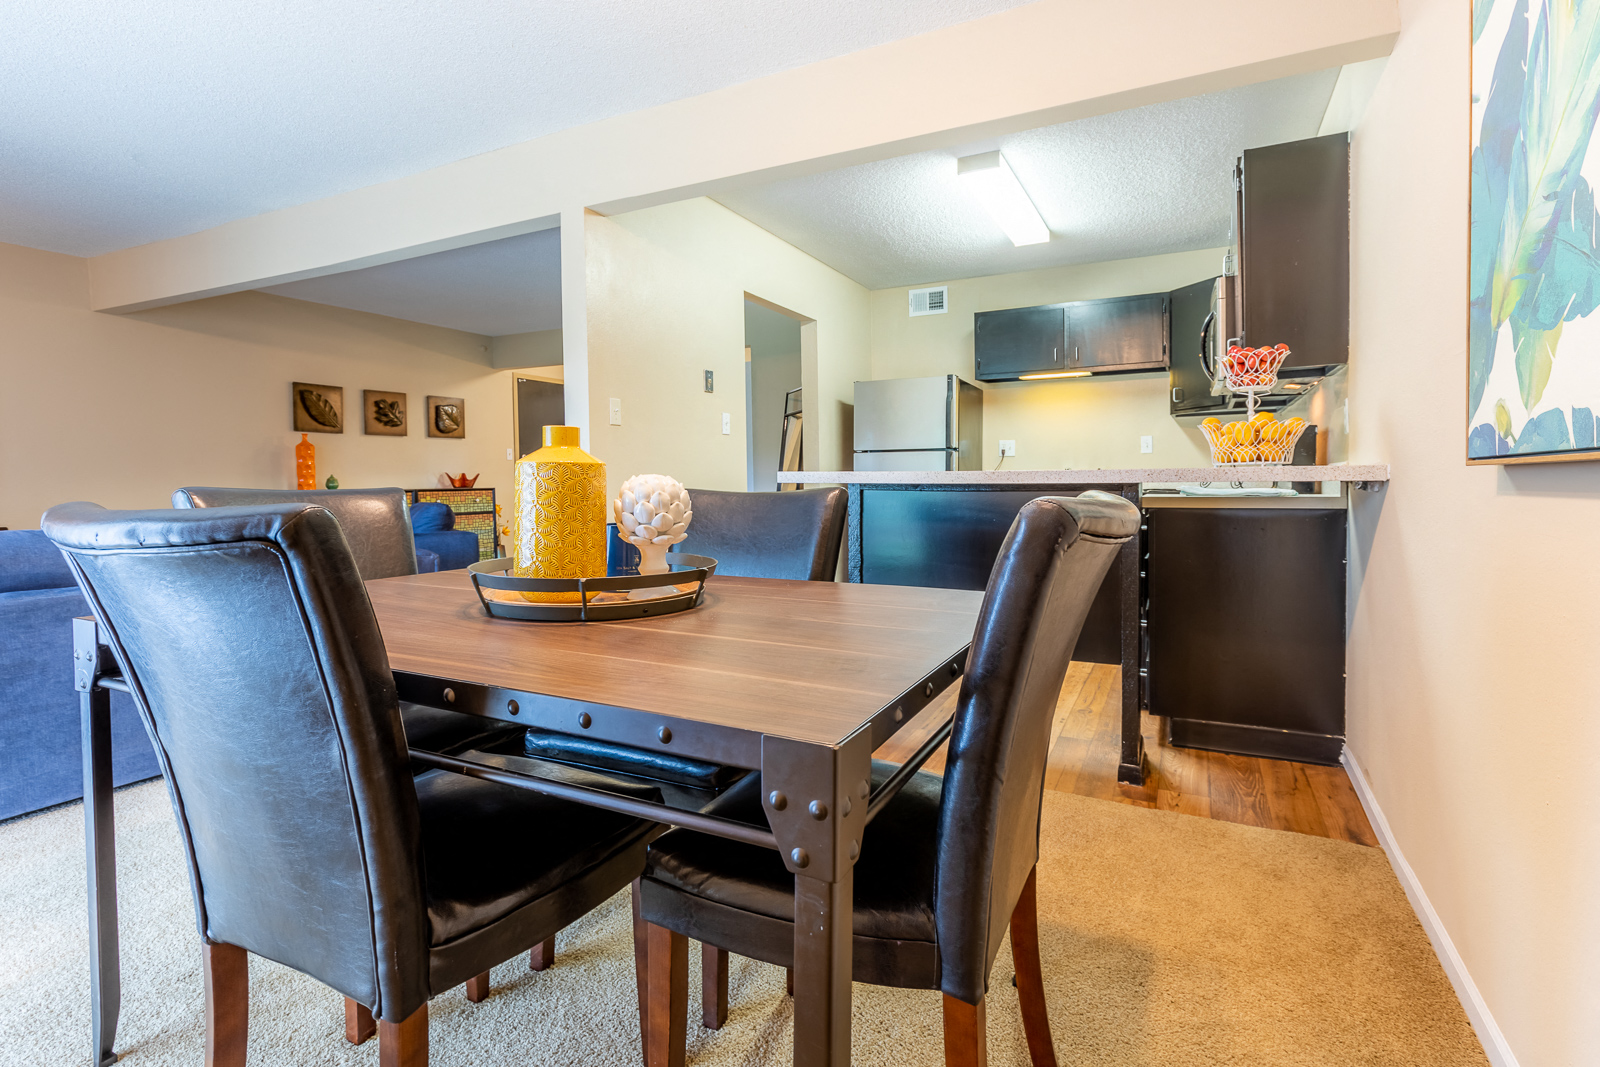 Dining table and chair at Preston Court Apartments, Overland Park, Kansas